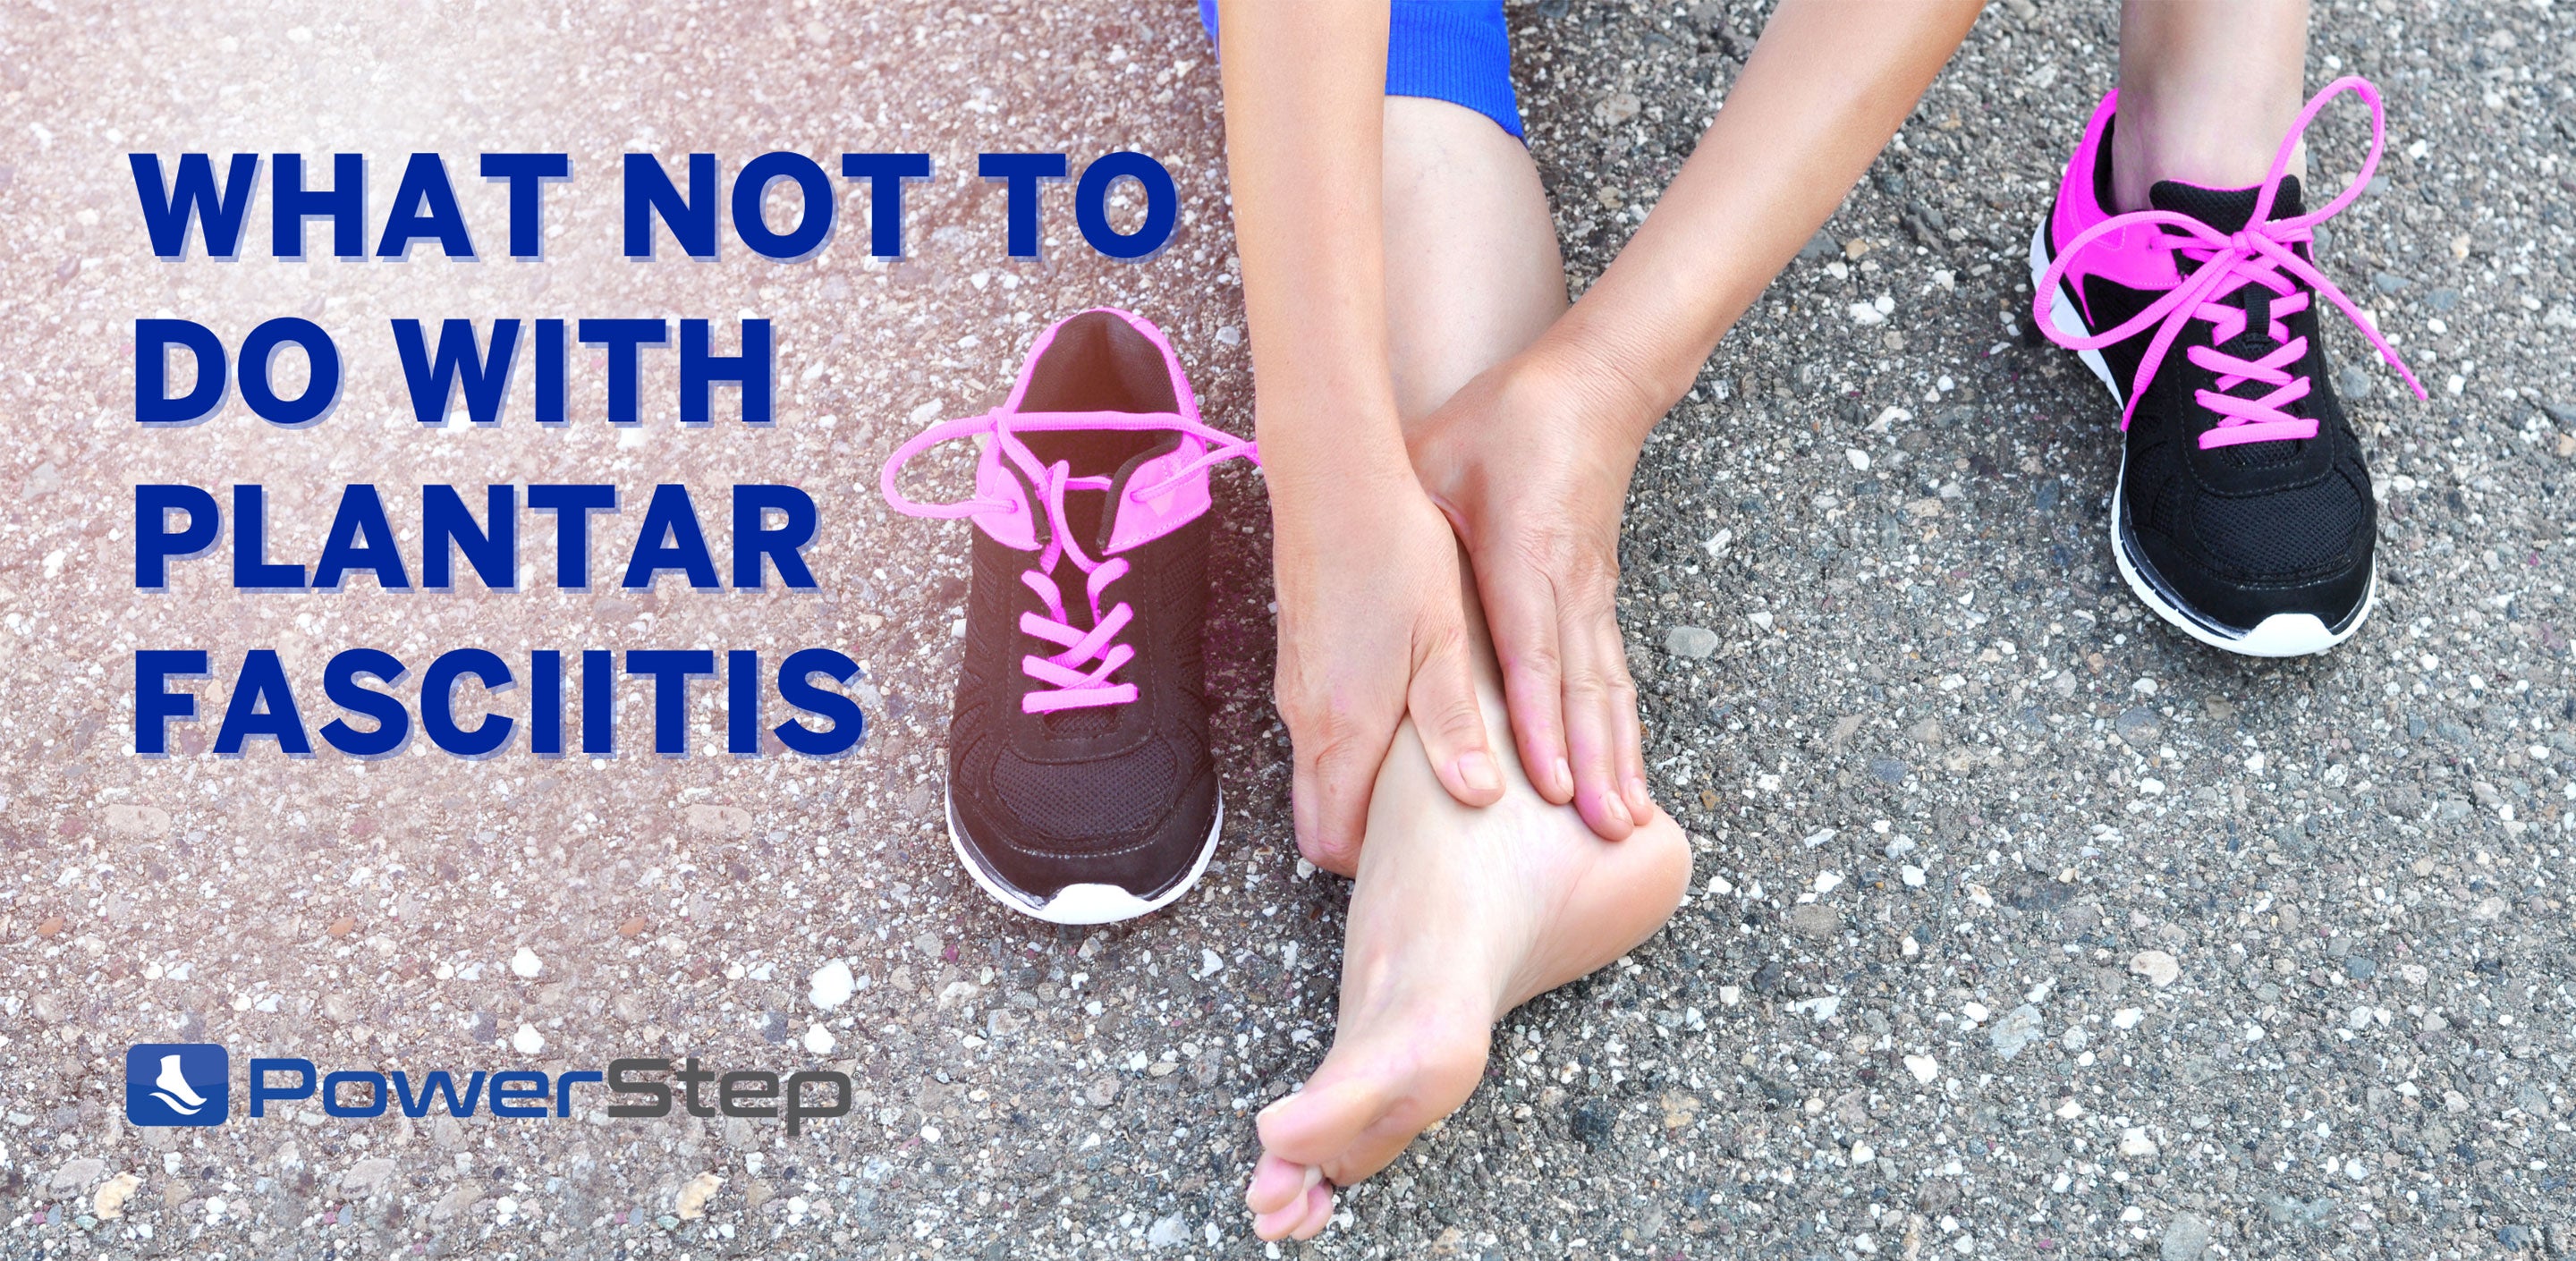 What Not to Do with Plantar Fasciitis by PowerStep